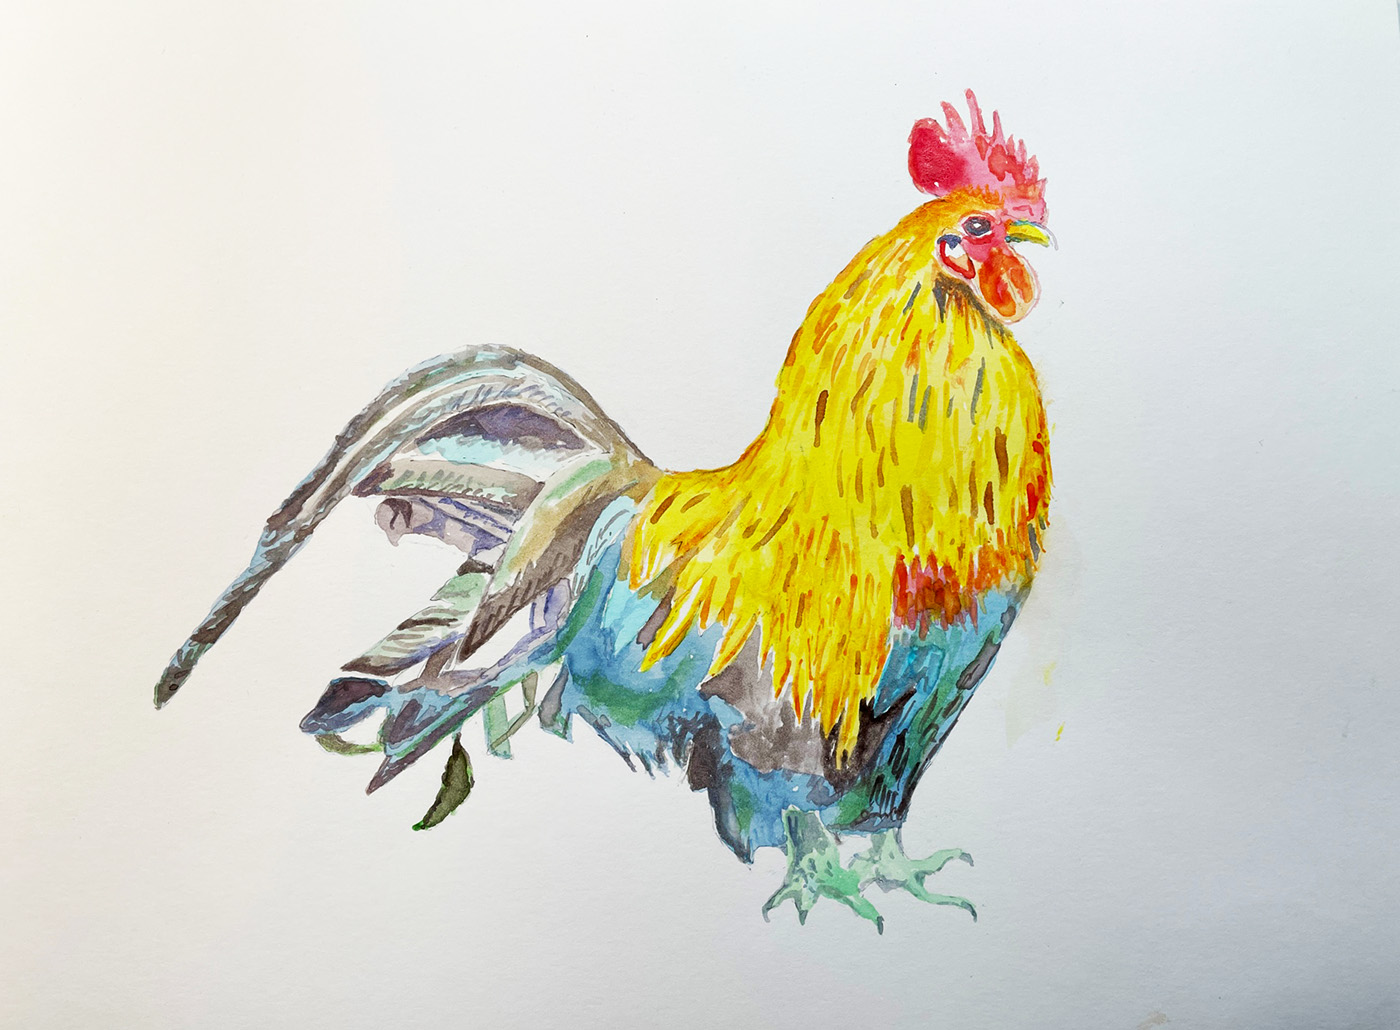 Watercolor paining of a rooster